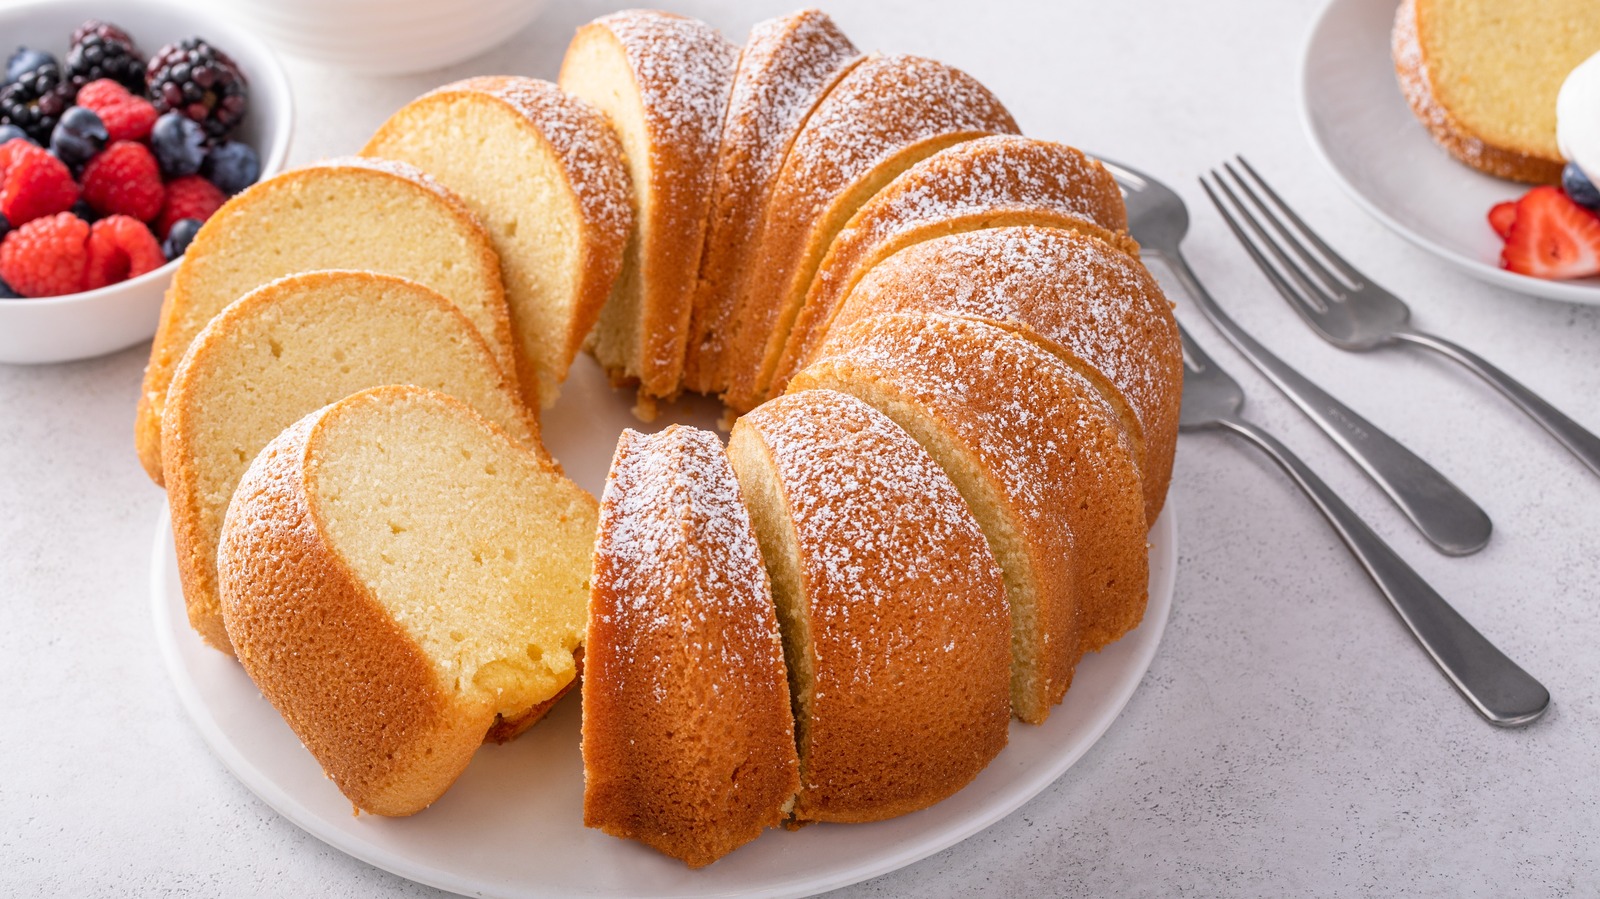 The Butter Alternative To Grease A Bundt Pan If Your Cakes Stick